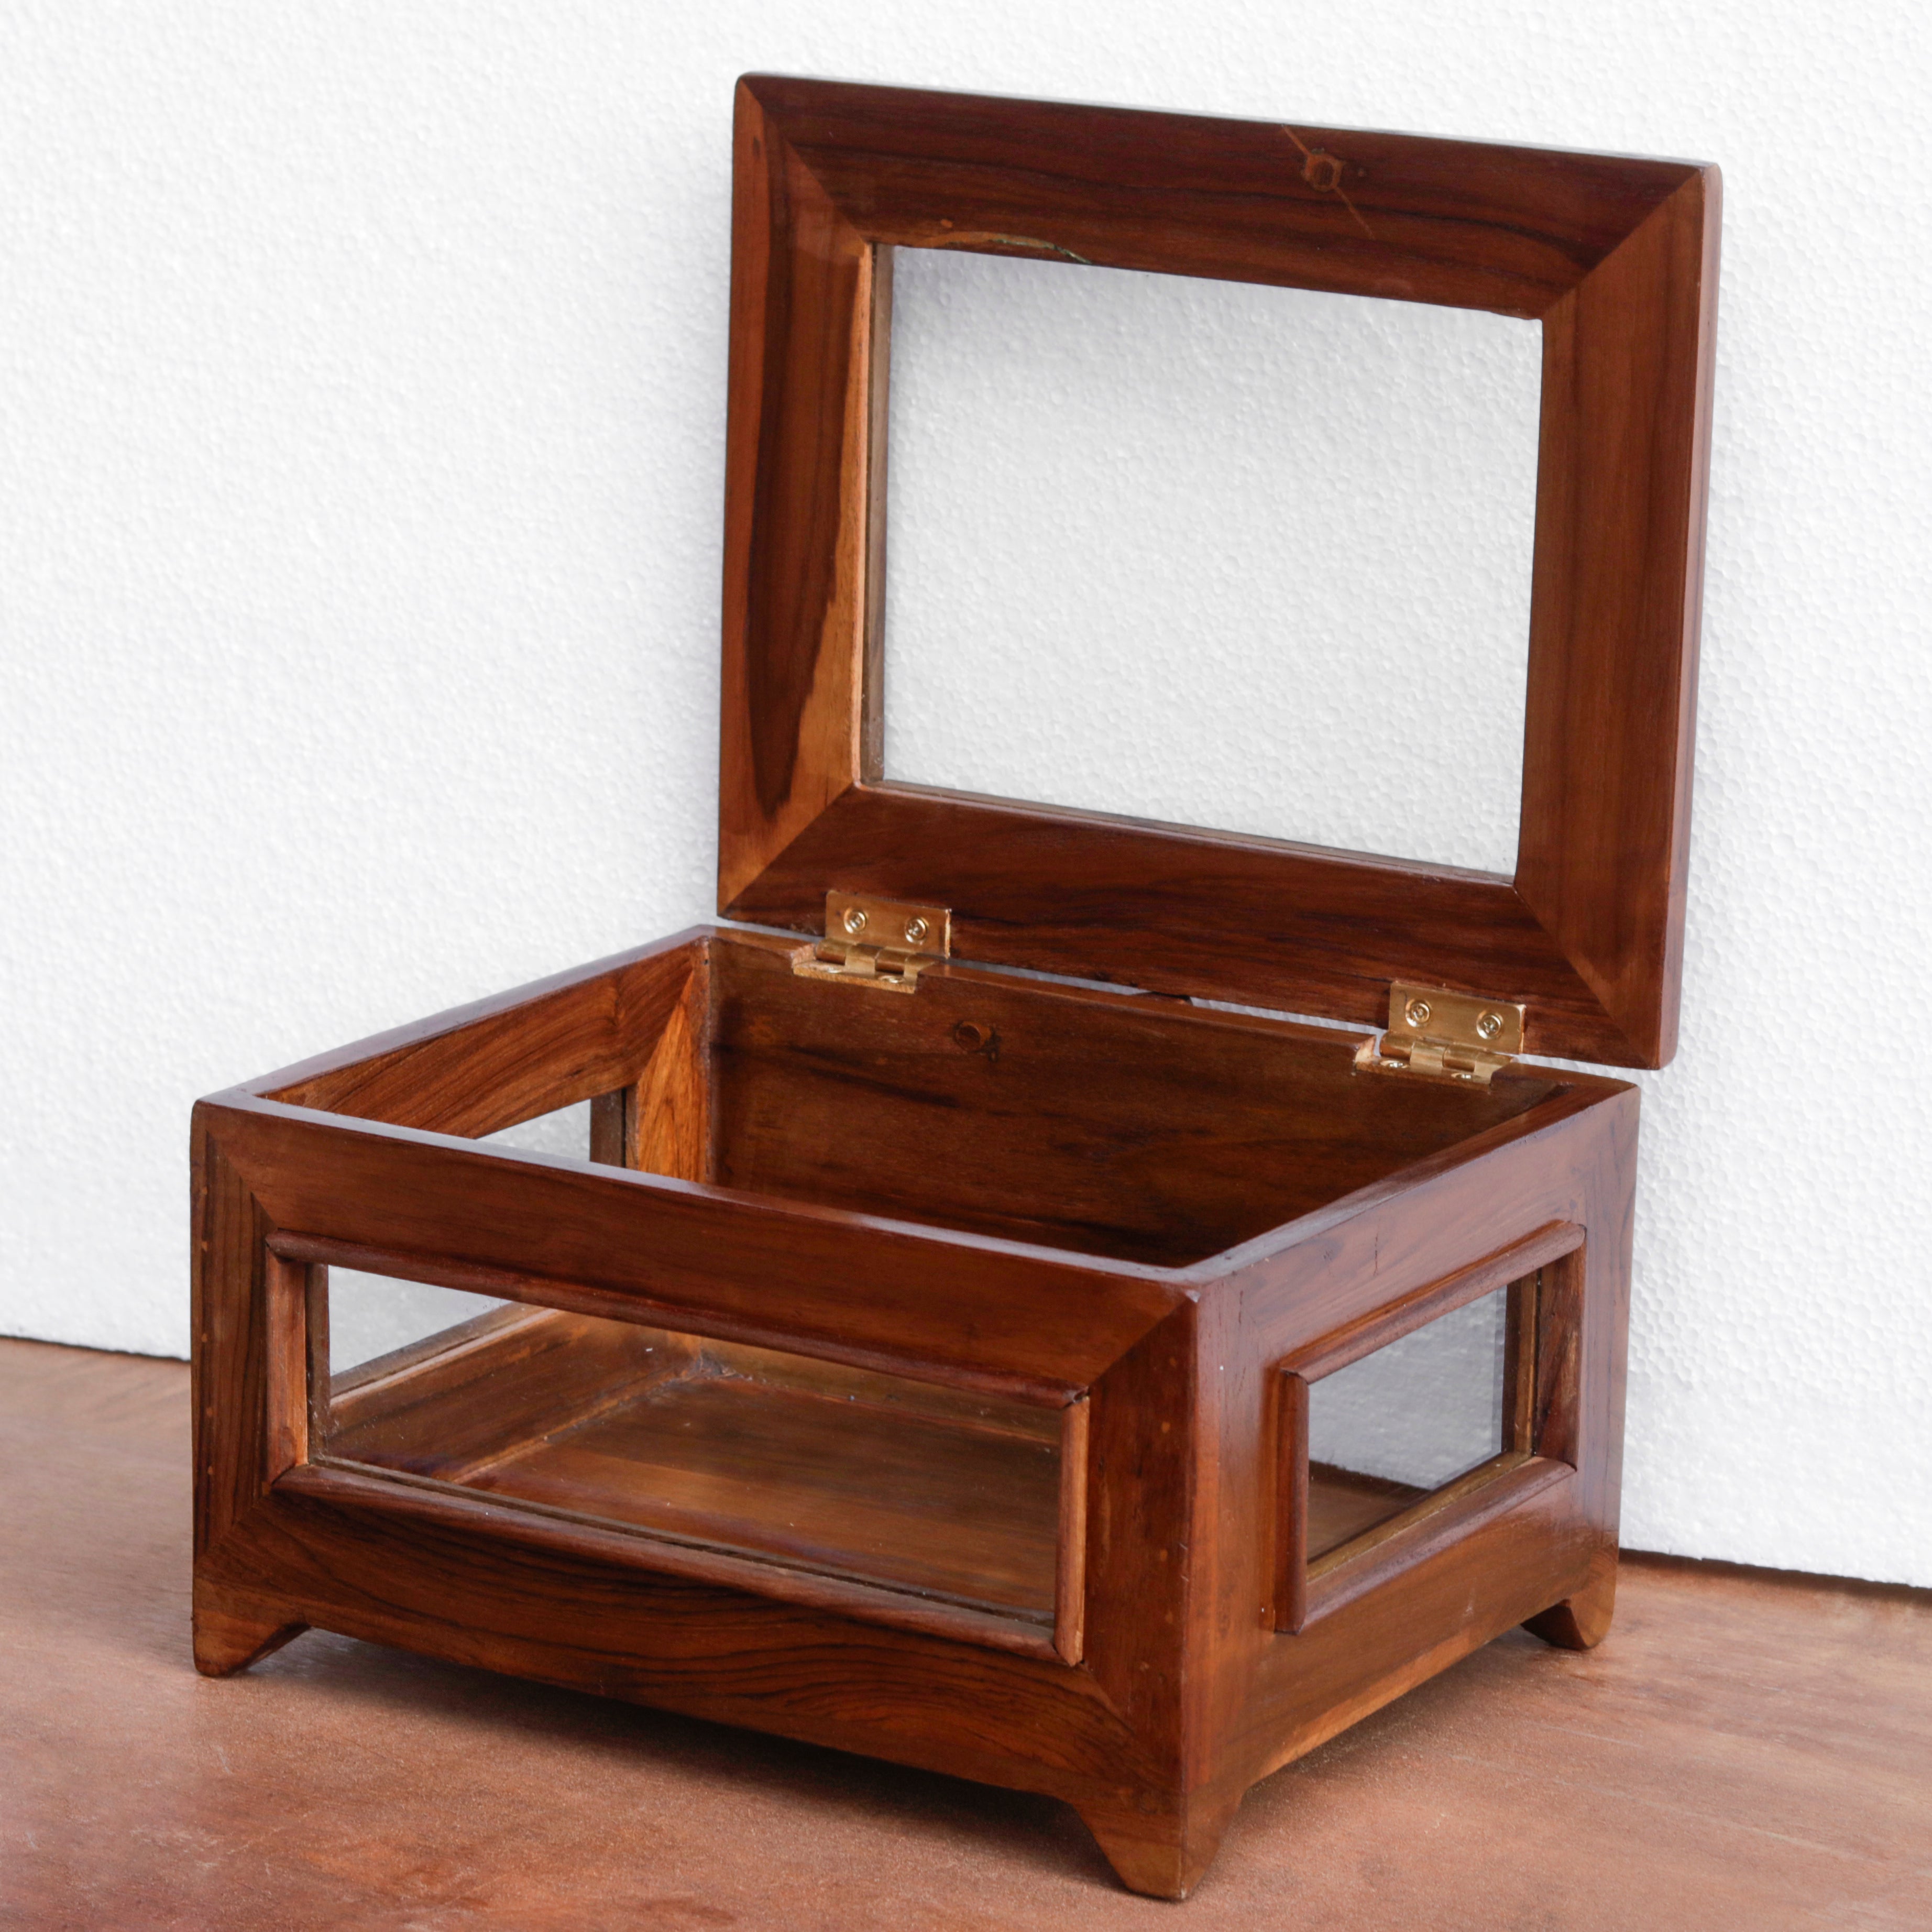 Vintage Transparent Mirror Fitted Wooden Handmade Jewelry Box Wooden Box